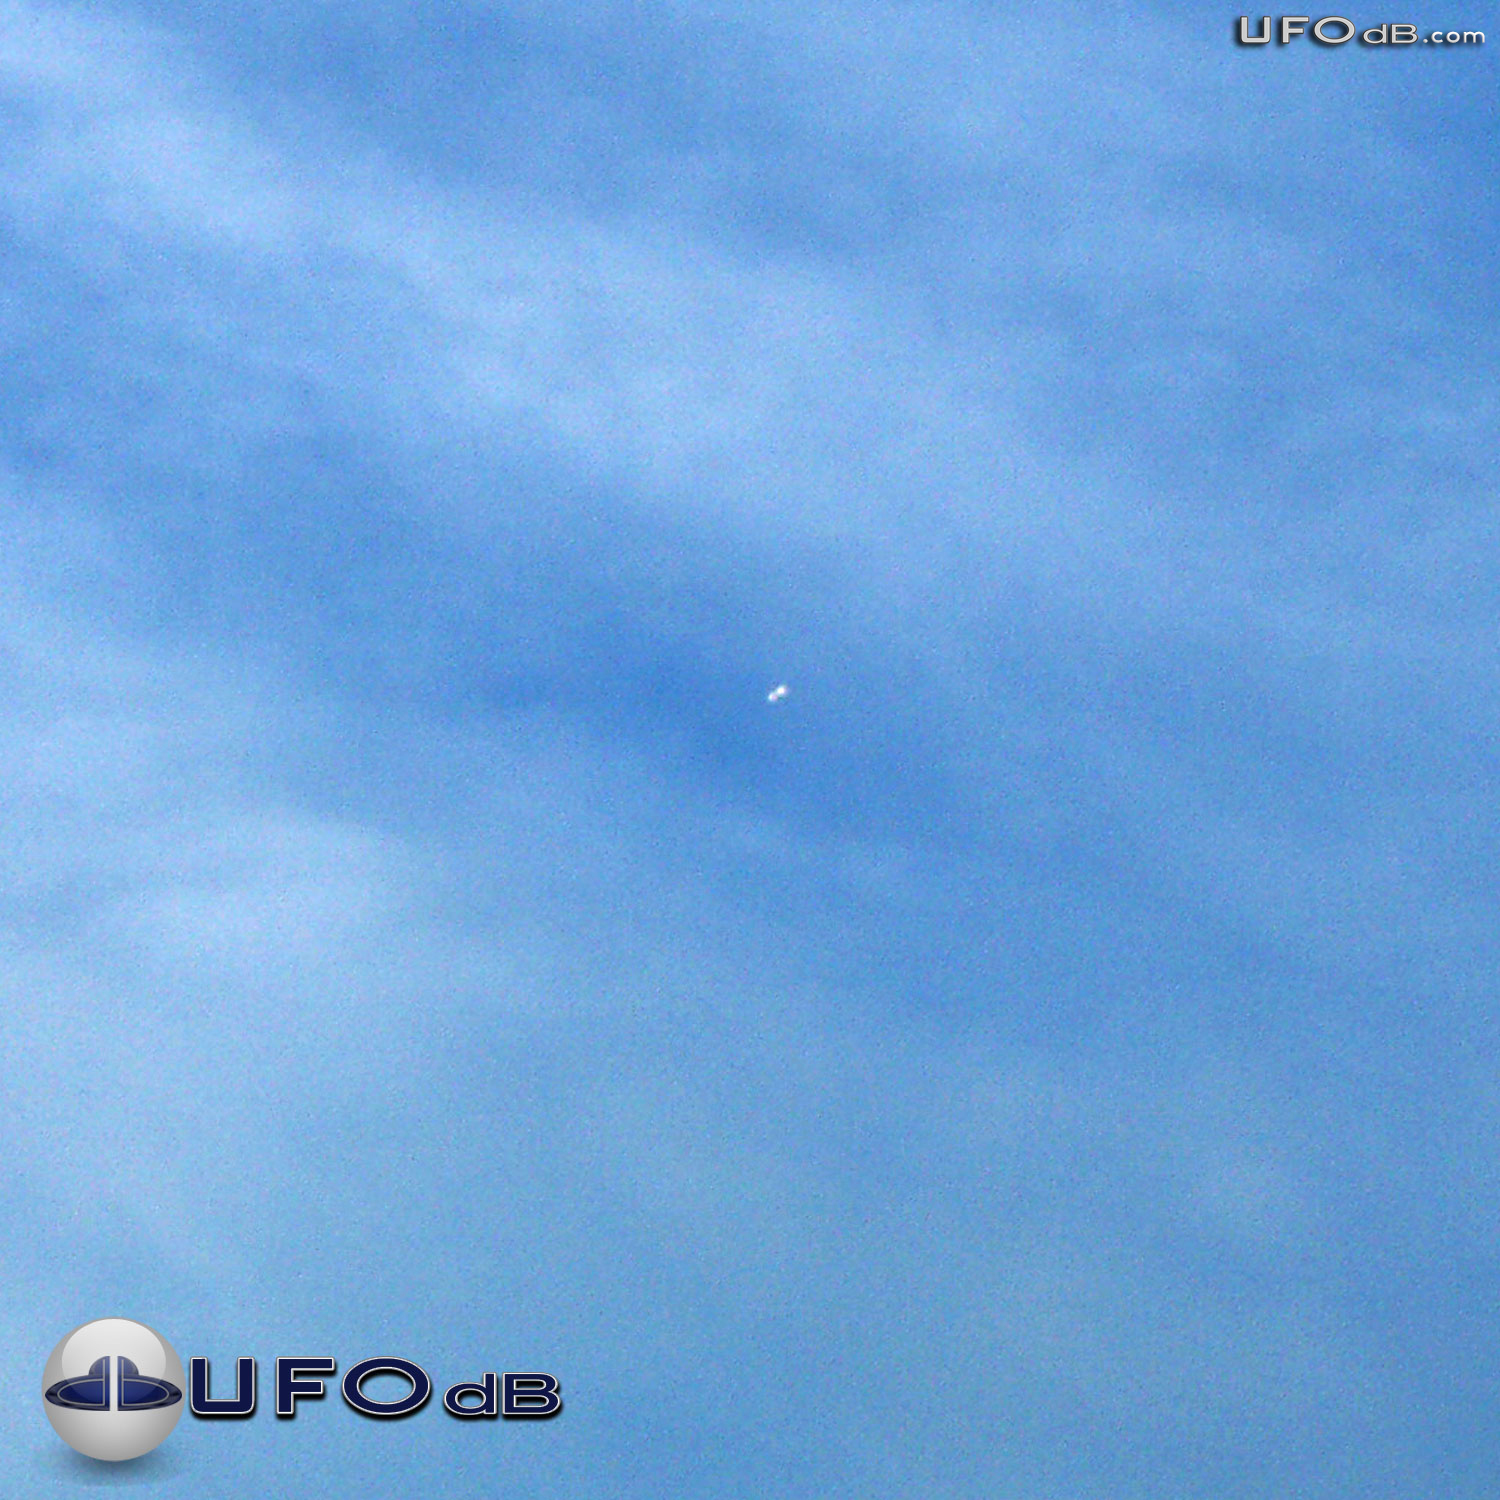 Kids run into the house after UFO sighting | Littleton USA April 2011 UFO Picture #274-1